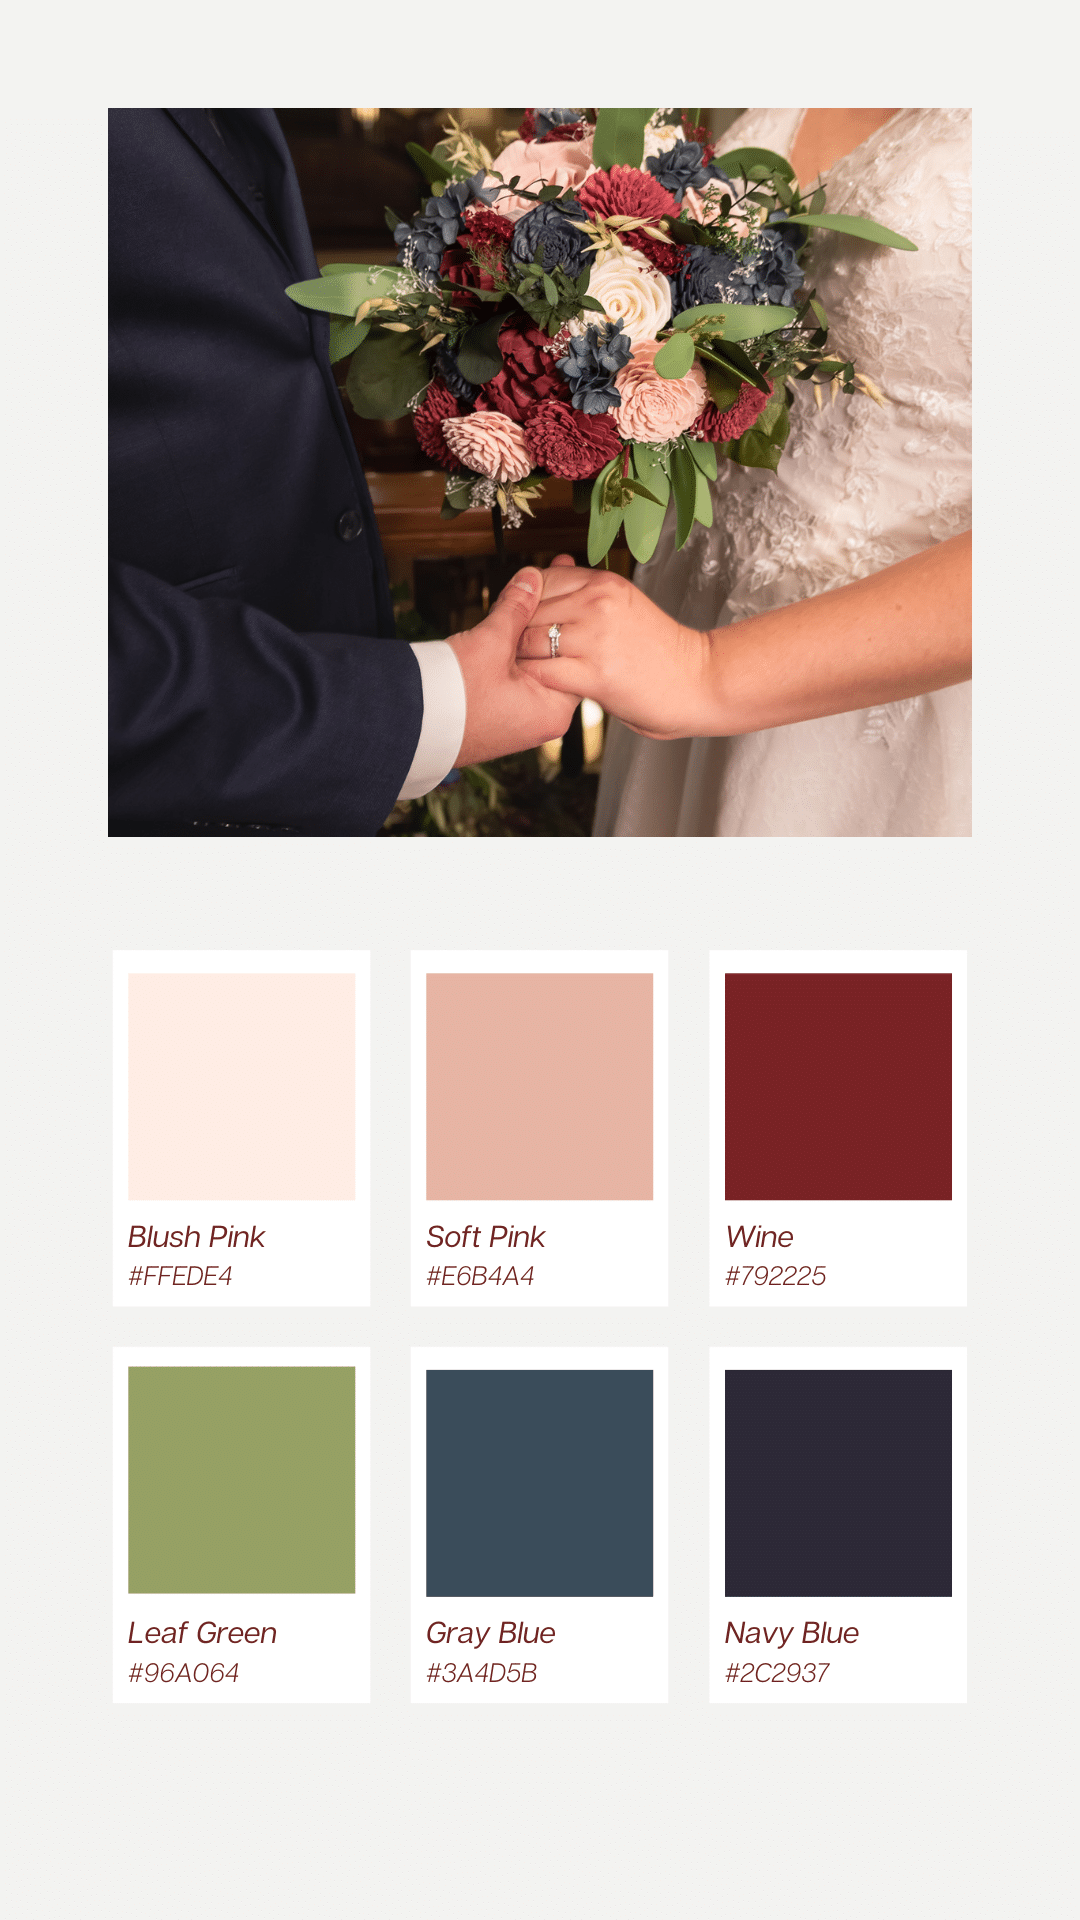 View of a wedding table and a color palette of six color chips including blush pink, soft pink, wine, leaf green, gray blue, navy blue.